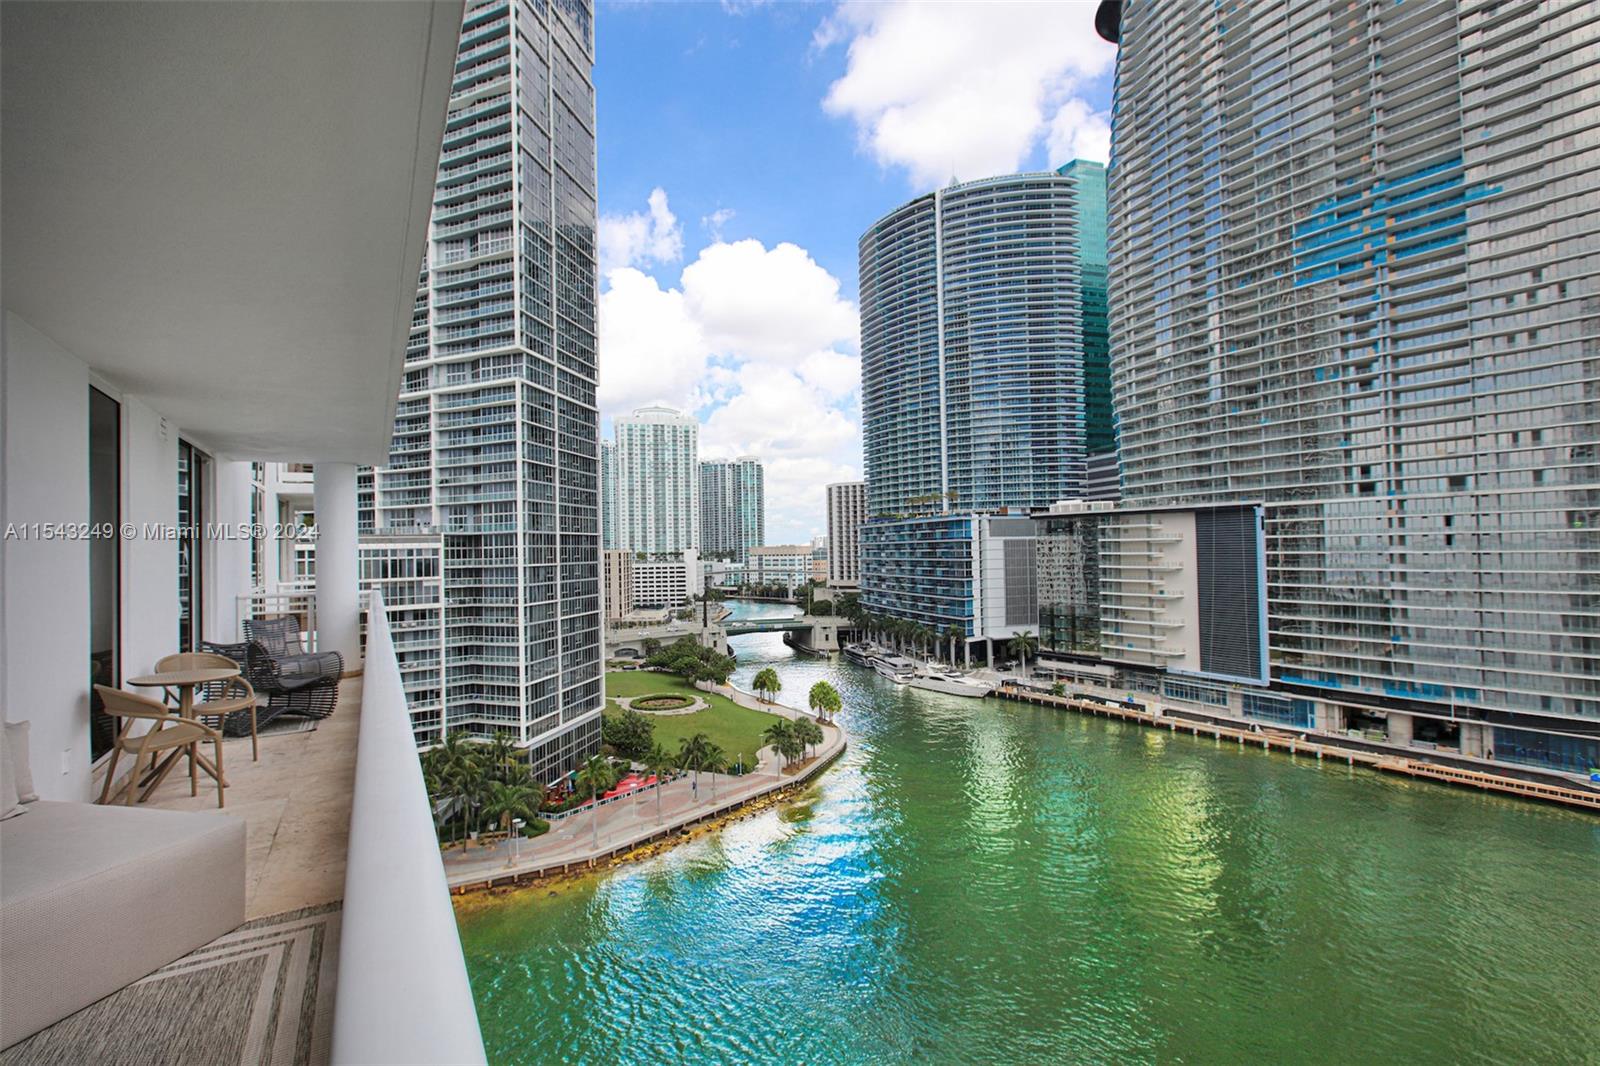 Beautiful bright, clean, freshly upgraded unit, with direct water views in the exclusive Island of Brickell Key. Semi private gated Island surrounded by water and the skyline of brickell and down town. The building has great amenities, and it's supremely well maintained. The unit includes 2 Large assigned covered parking spaces. Storage is also available For Rent. Brickell Key Master association is paid 1X per year by all owners that own in the island to maintain the common areas of the Island.